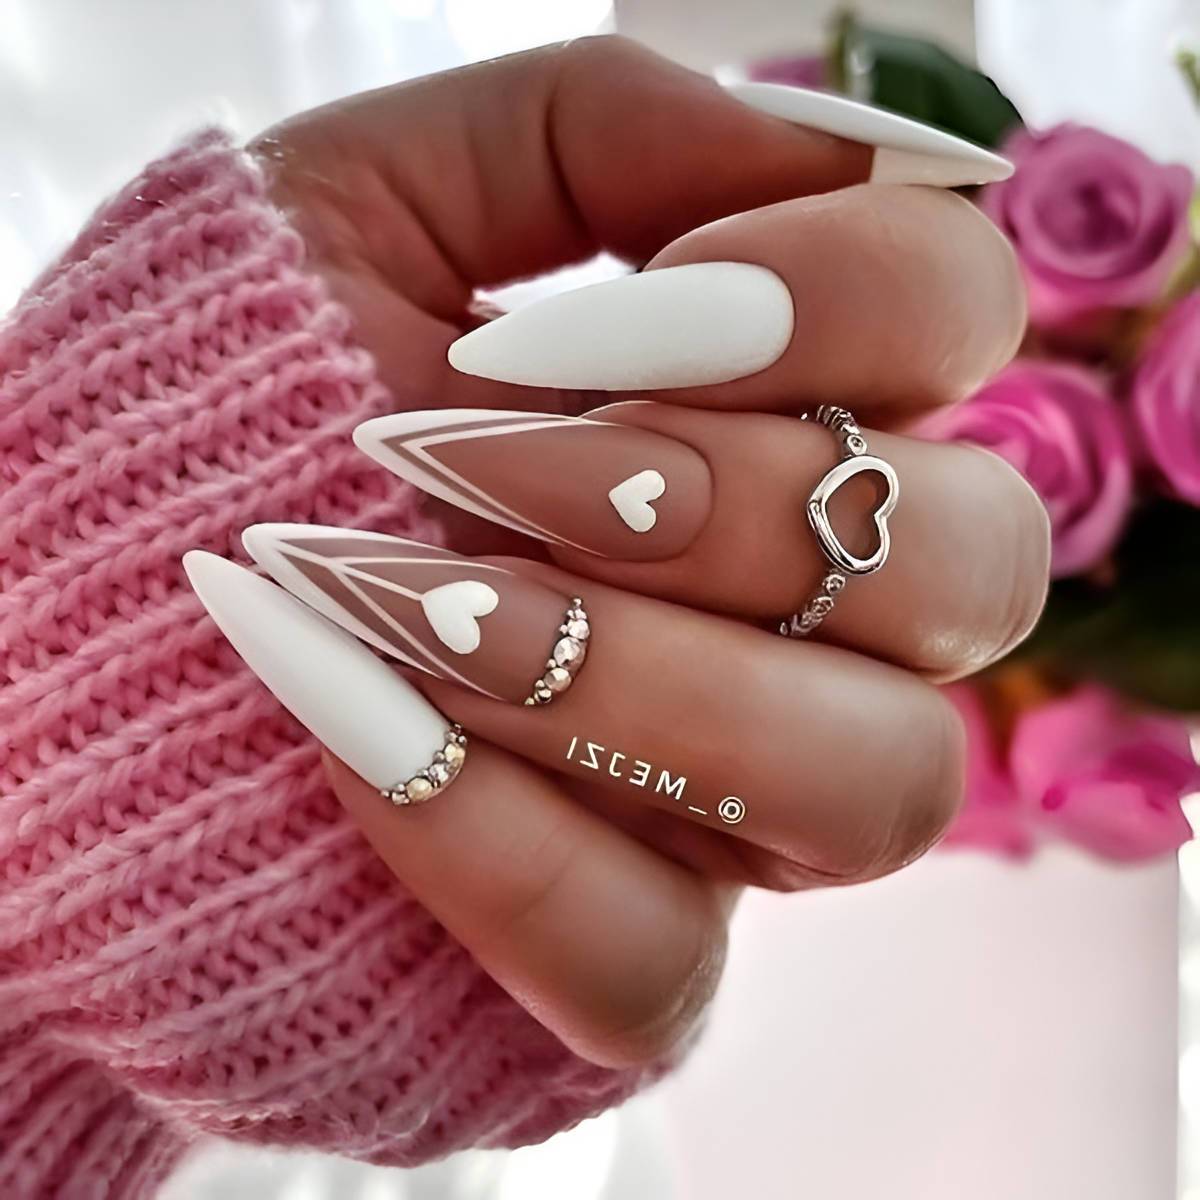 30 Glamorous White Nail Designs To Make You The Center Of Attention